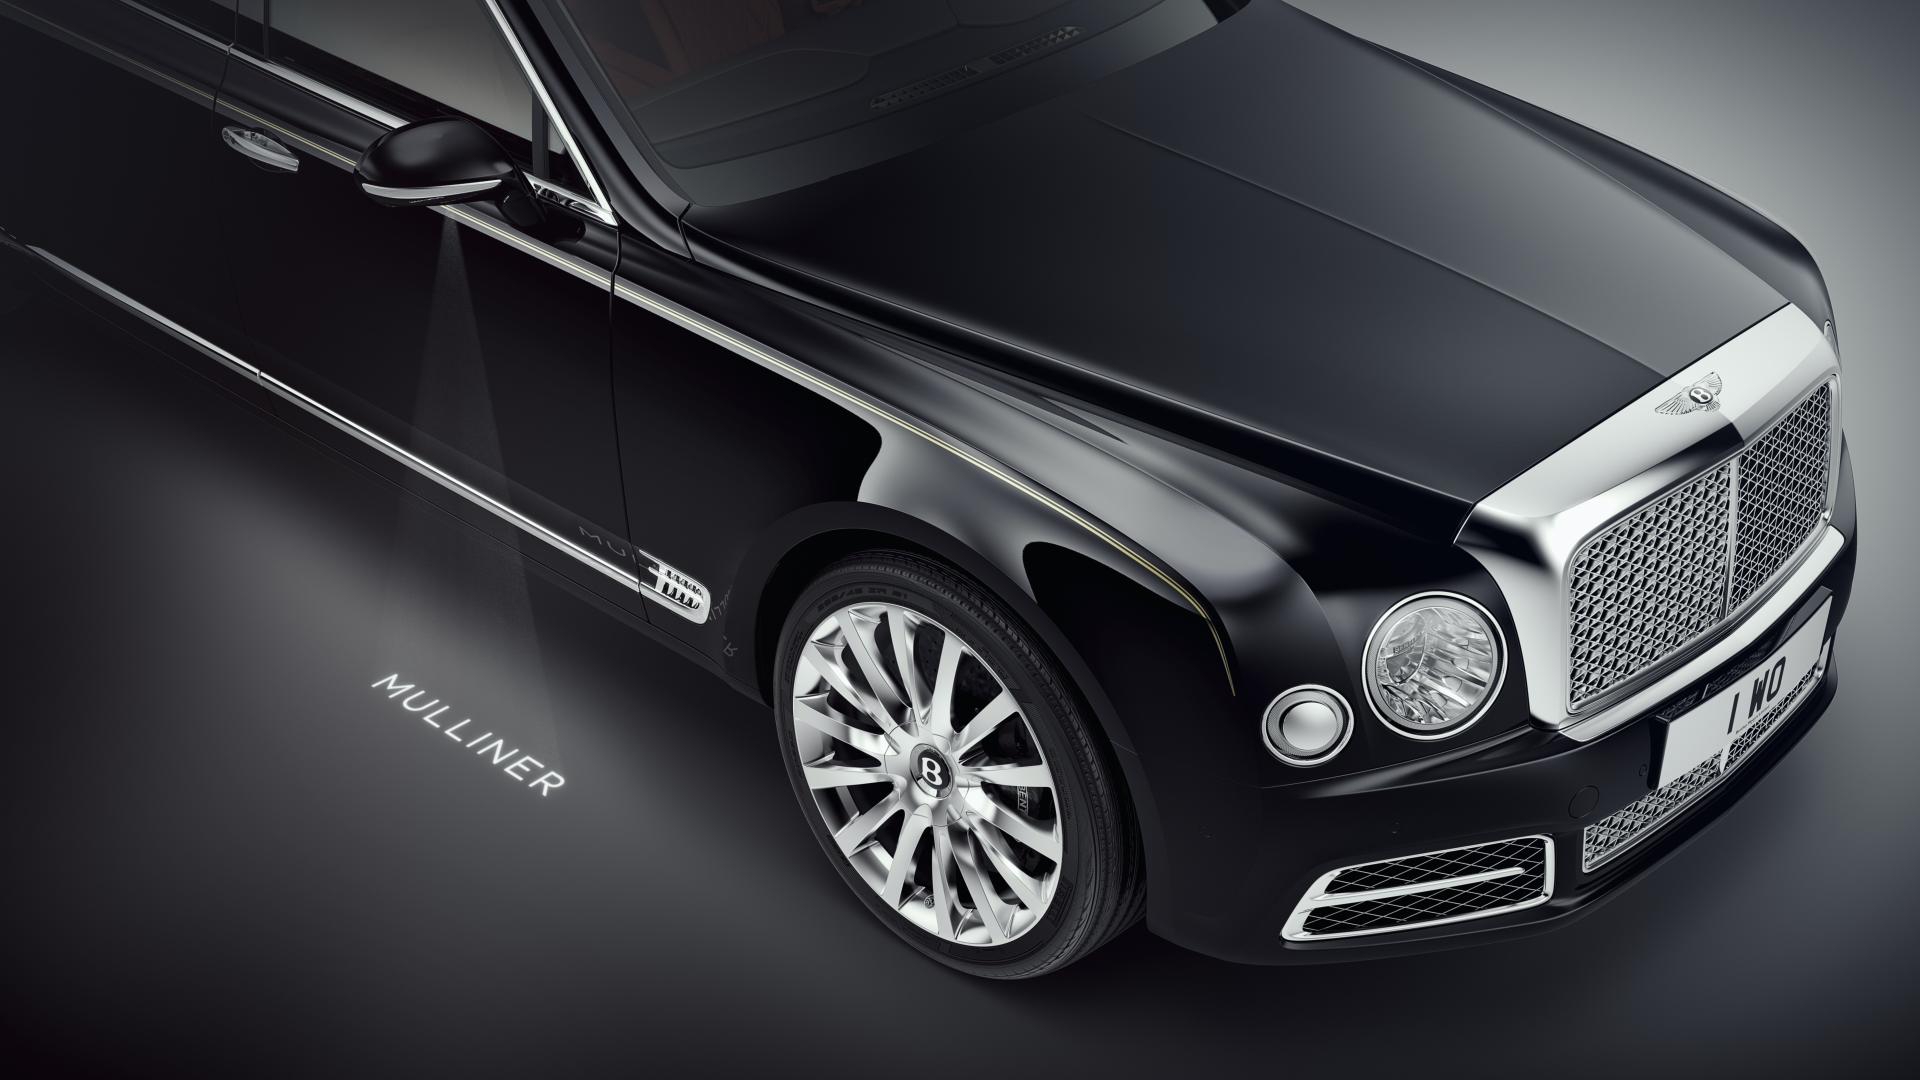 bentley-mulsanne-extended-wheelbase-limited-edition-for-china-7.jpg